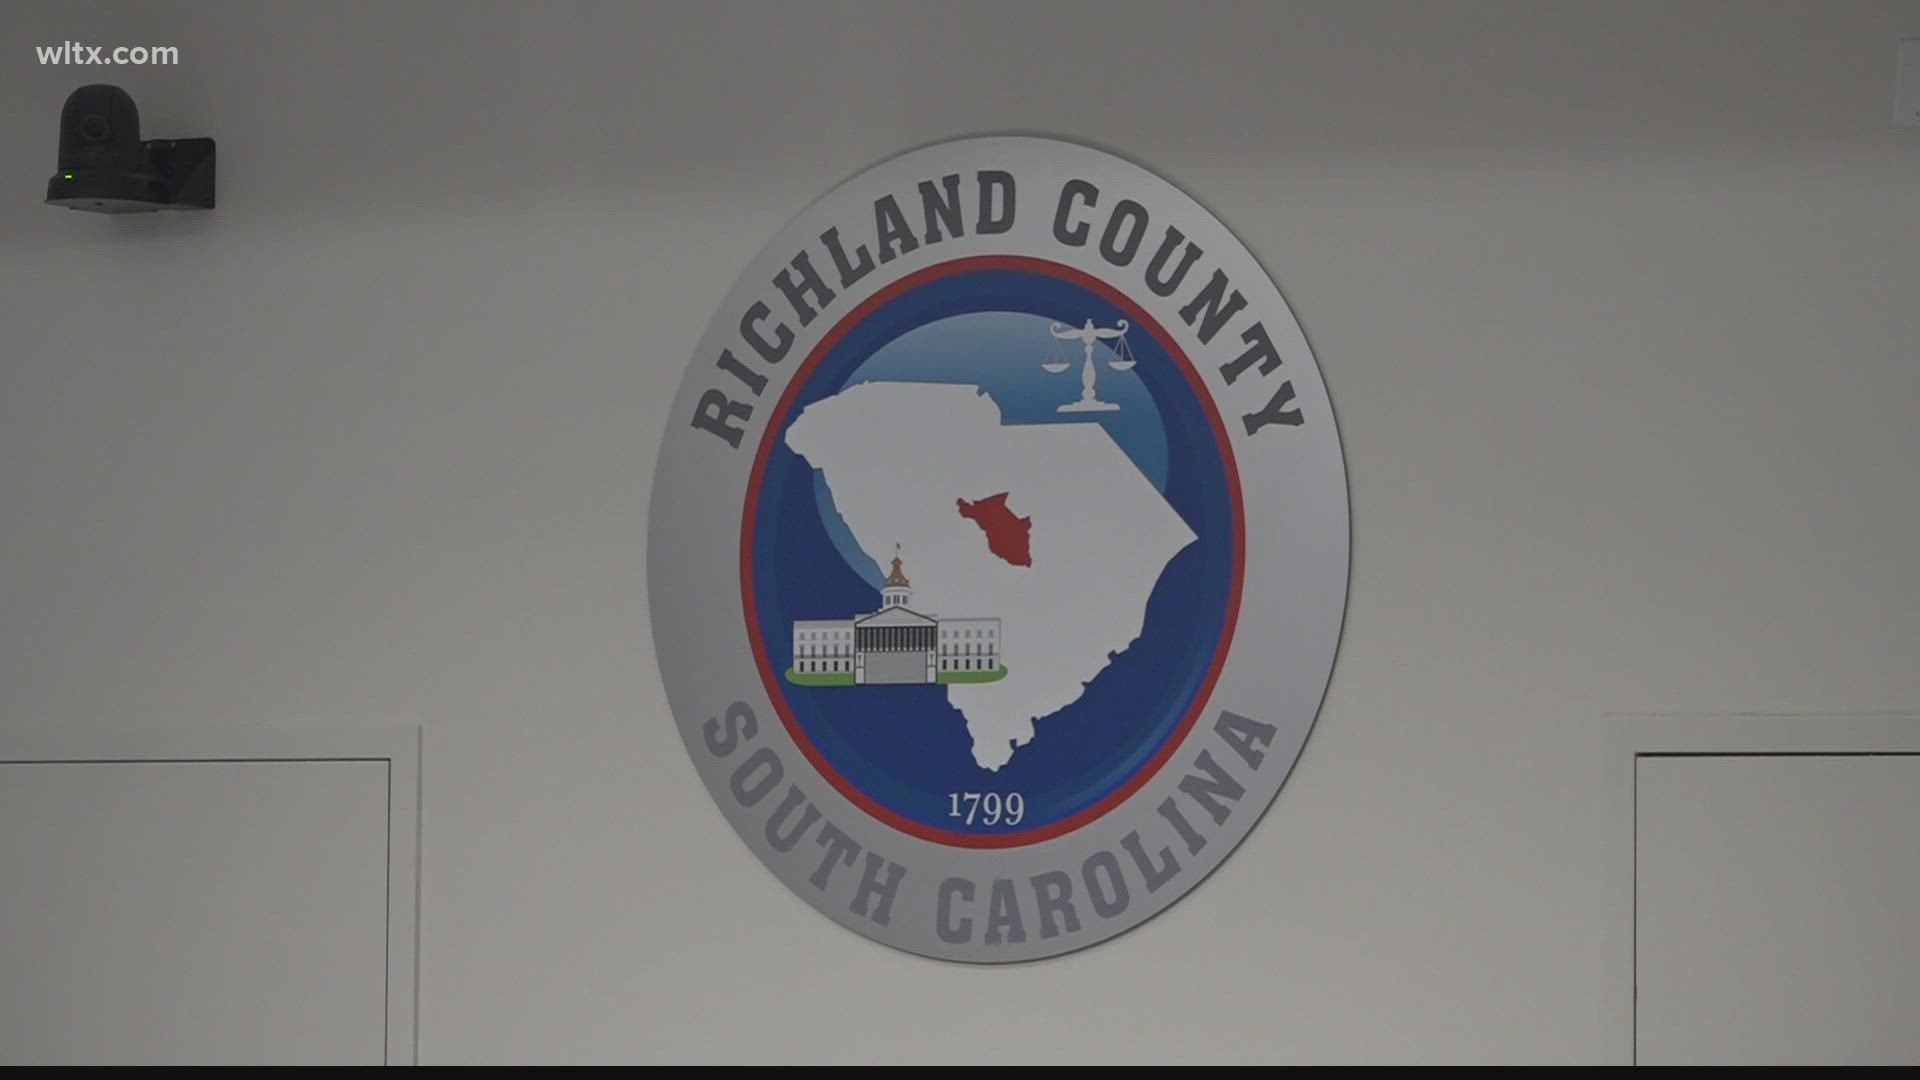 Richland County has approved a $40 million ordinance for a new Public Safety Center at Columbia Place Mall.